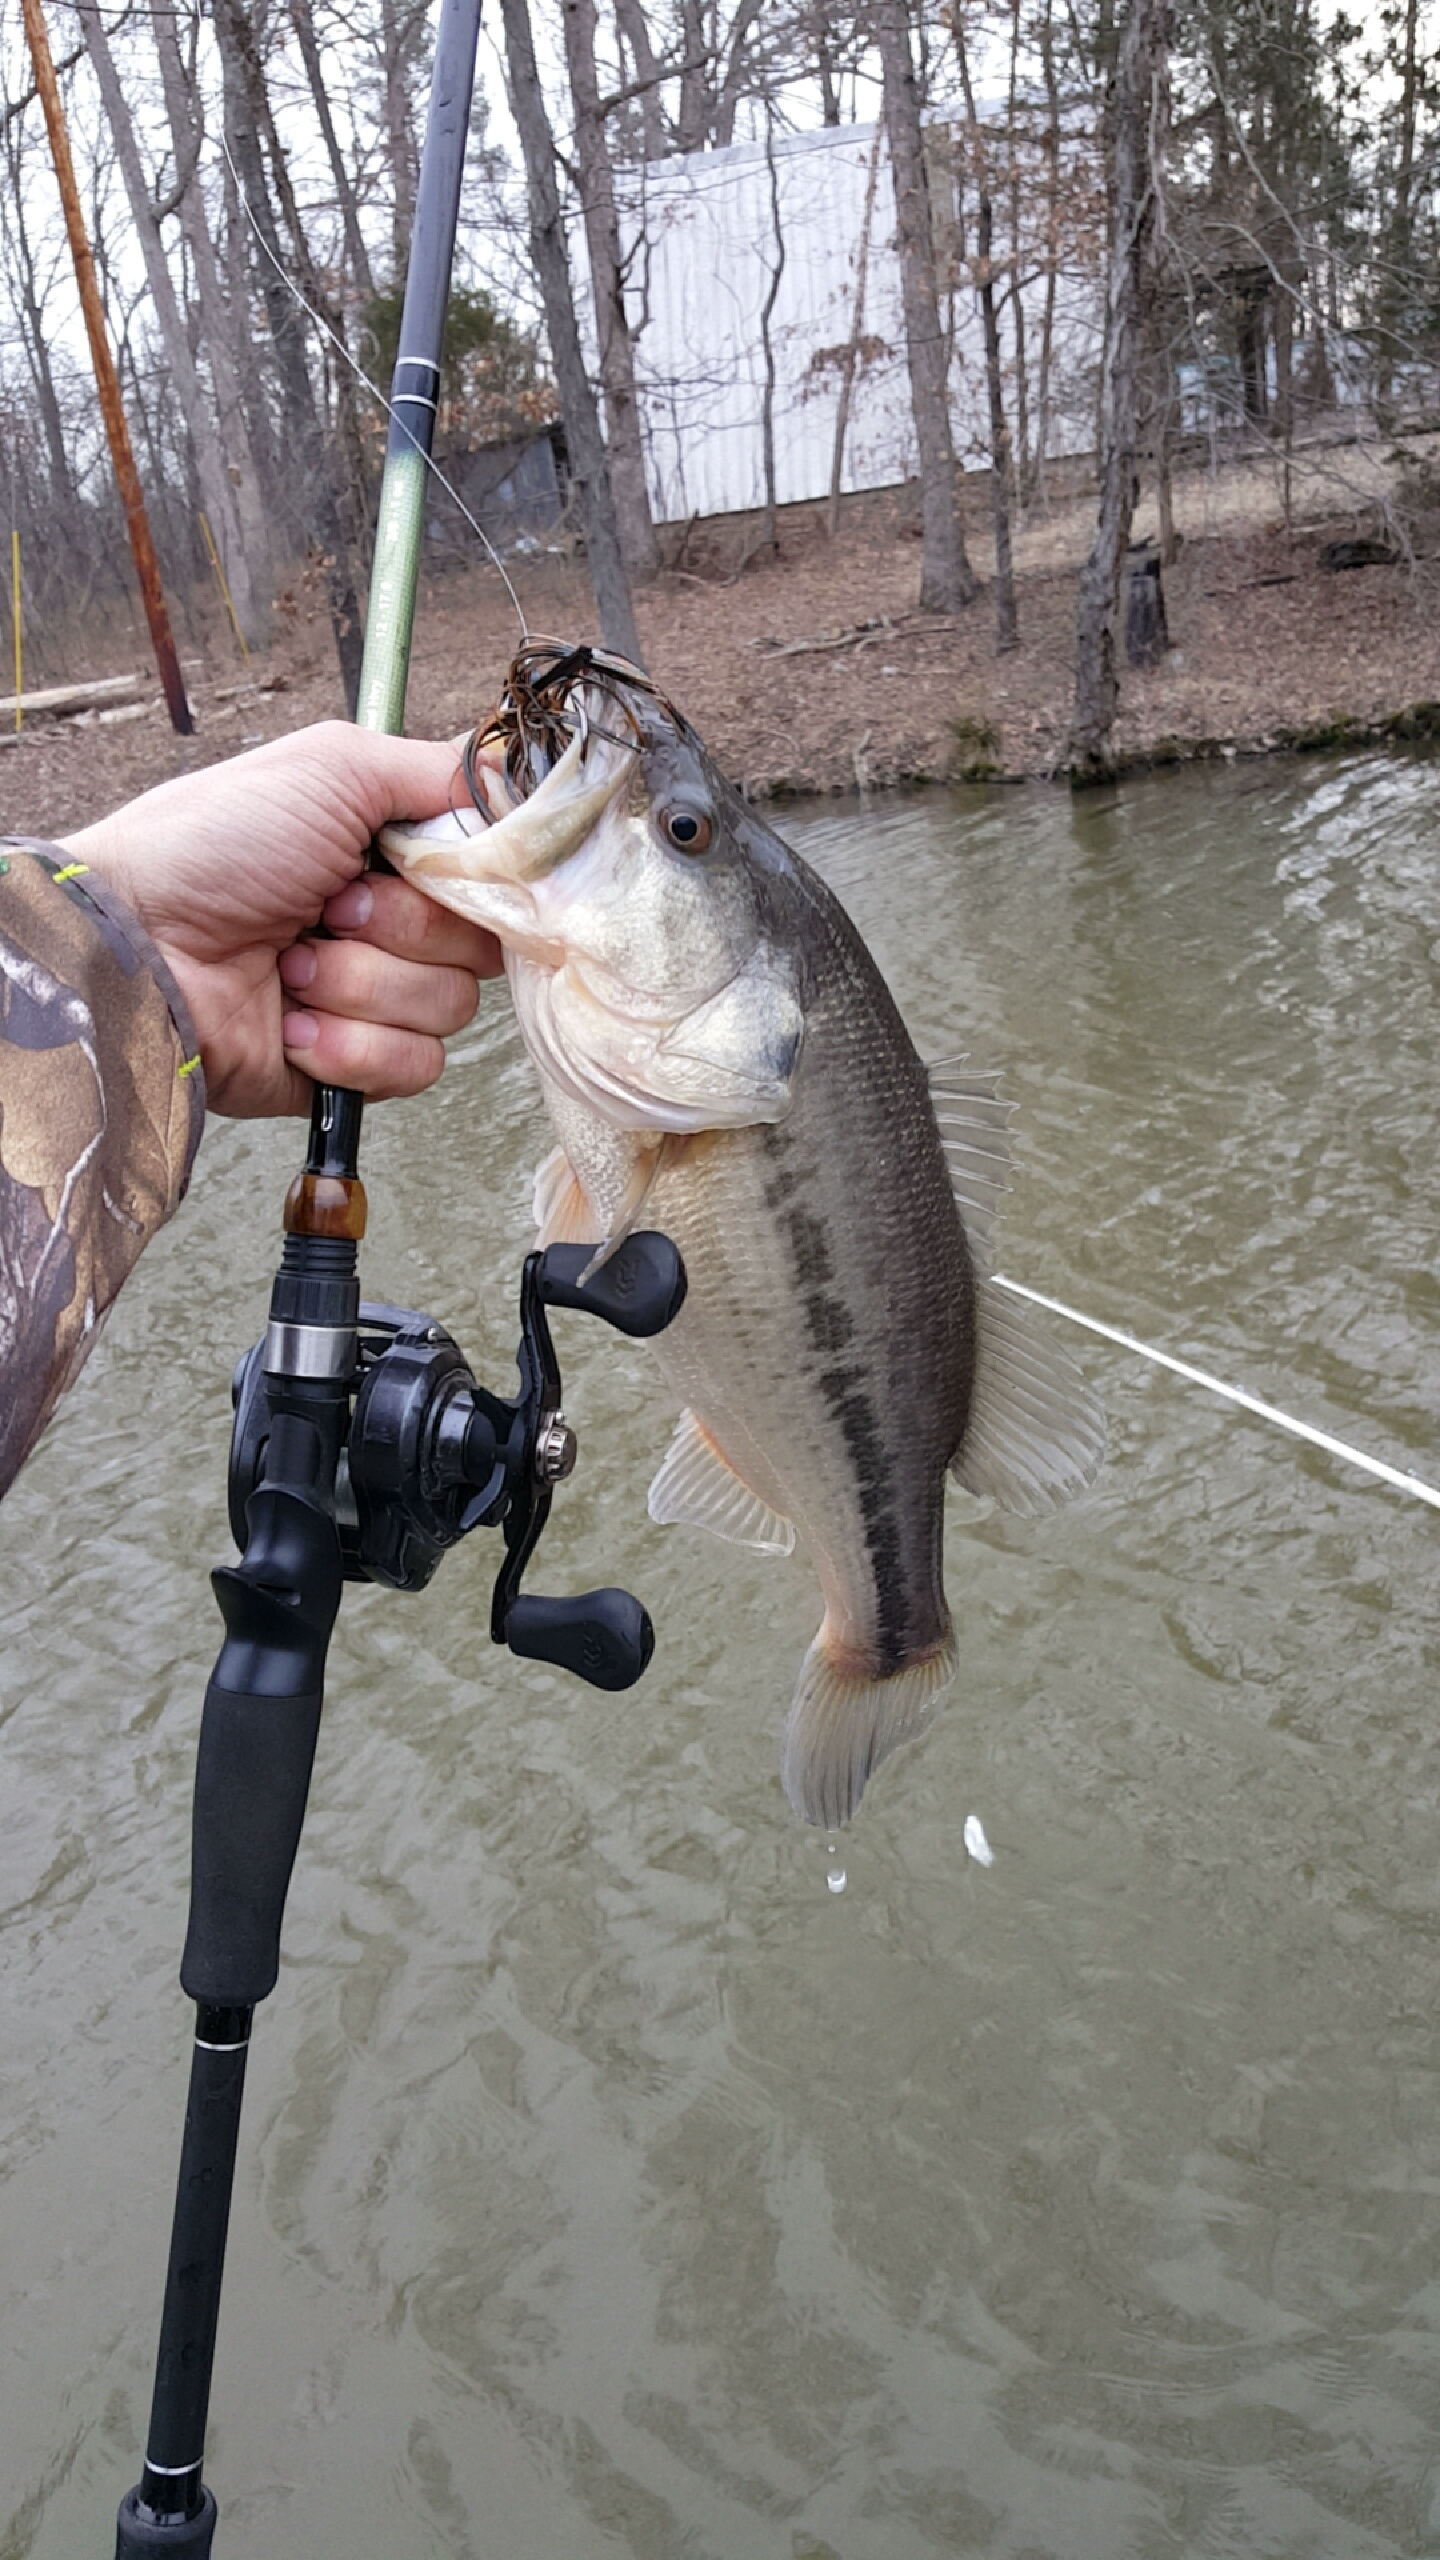 Fattest Sally of the year so far! 7.97 on a buzzbait! : r/bassfishing